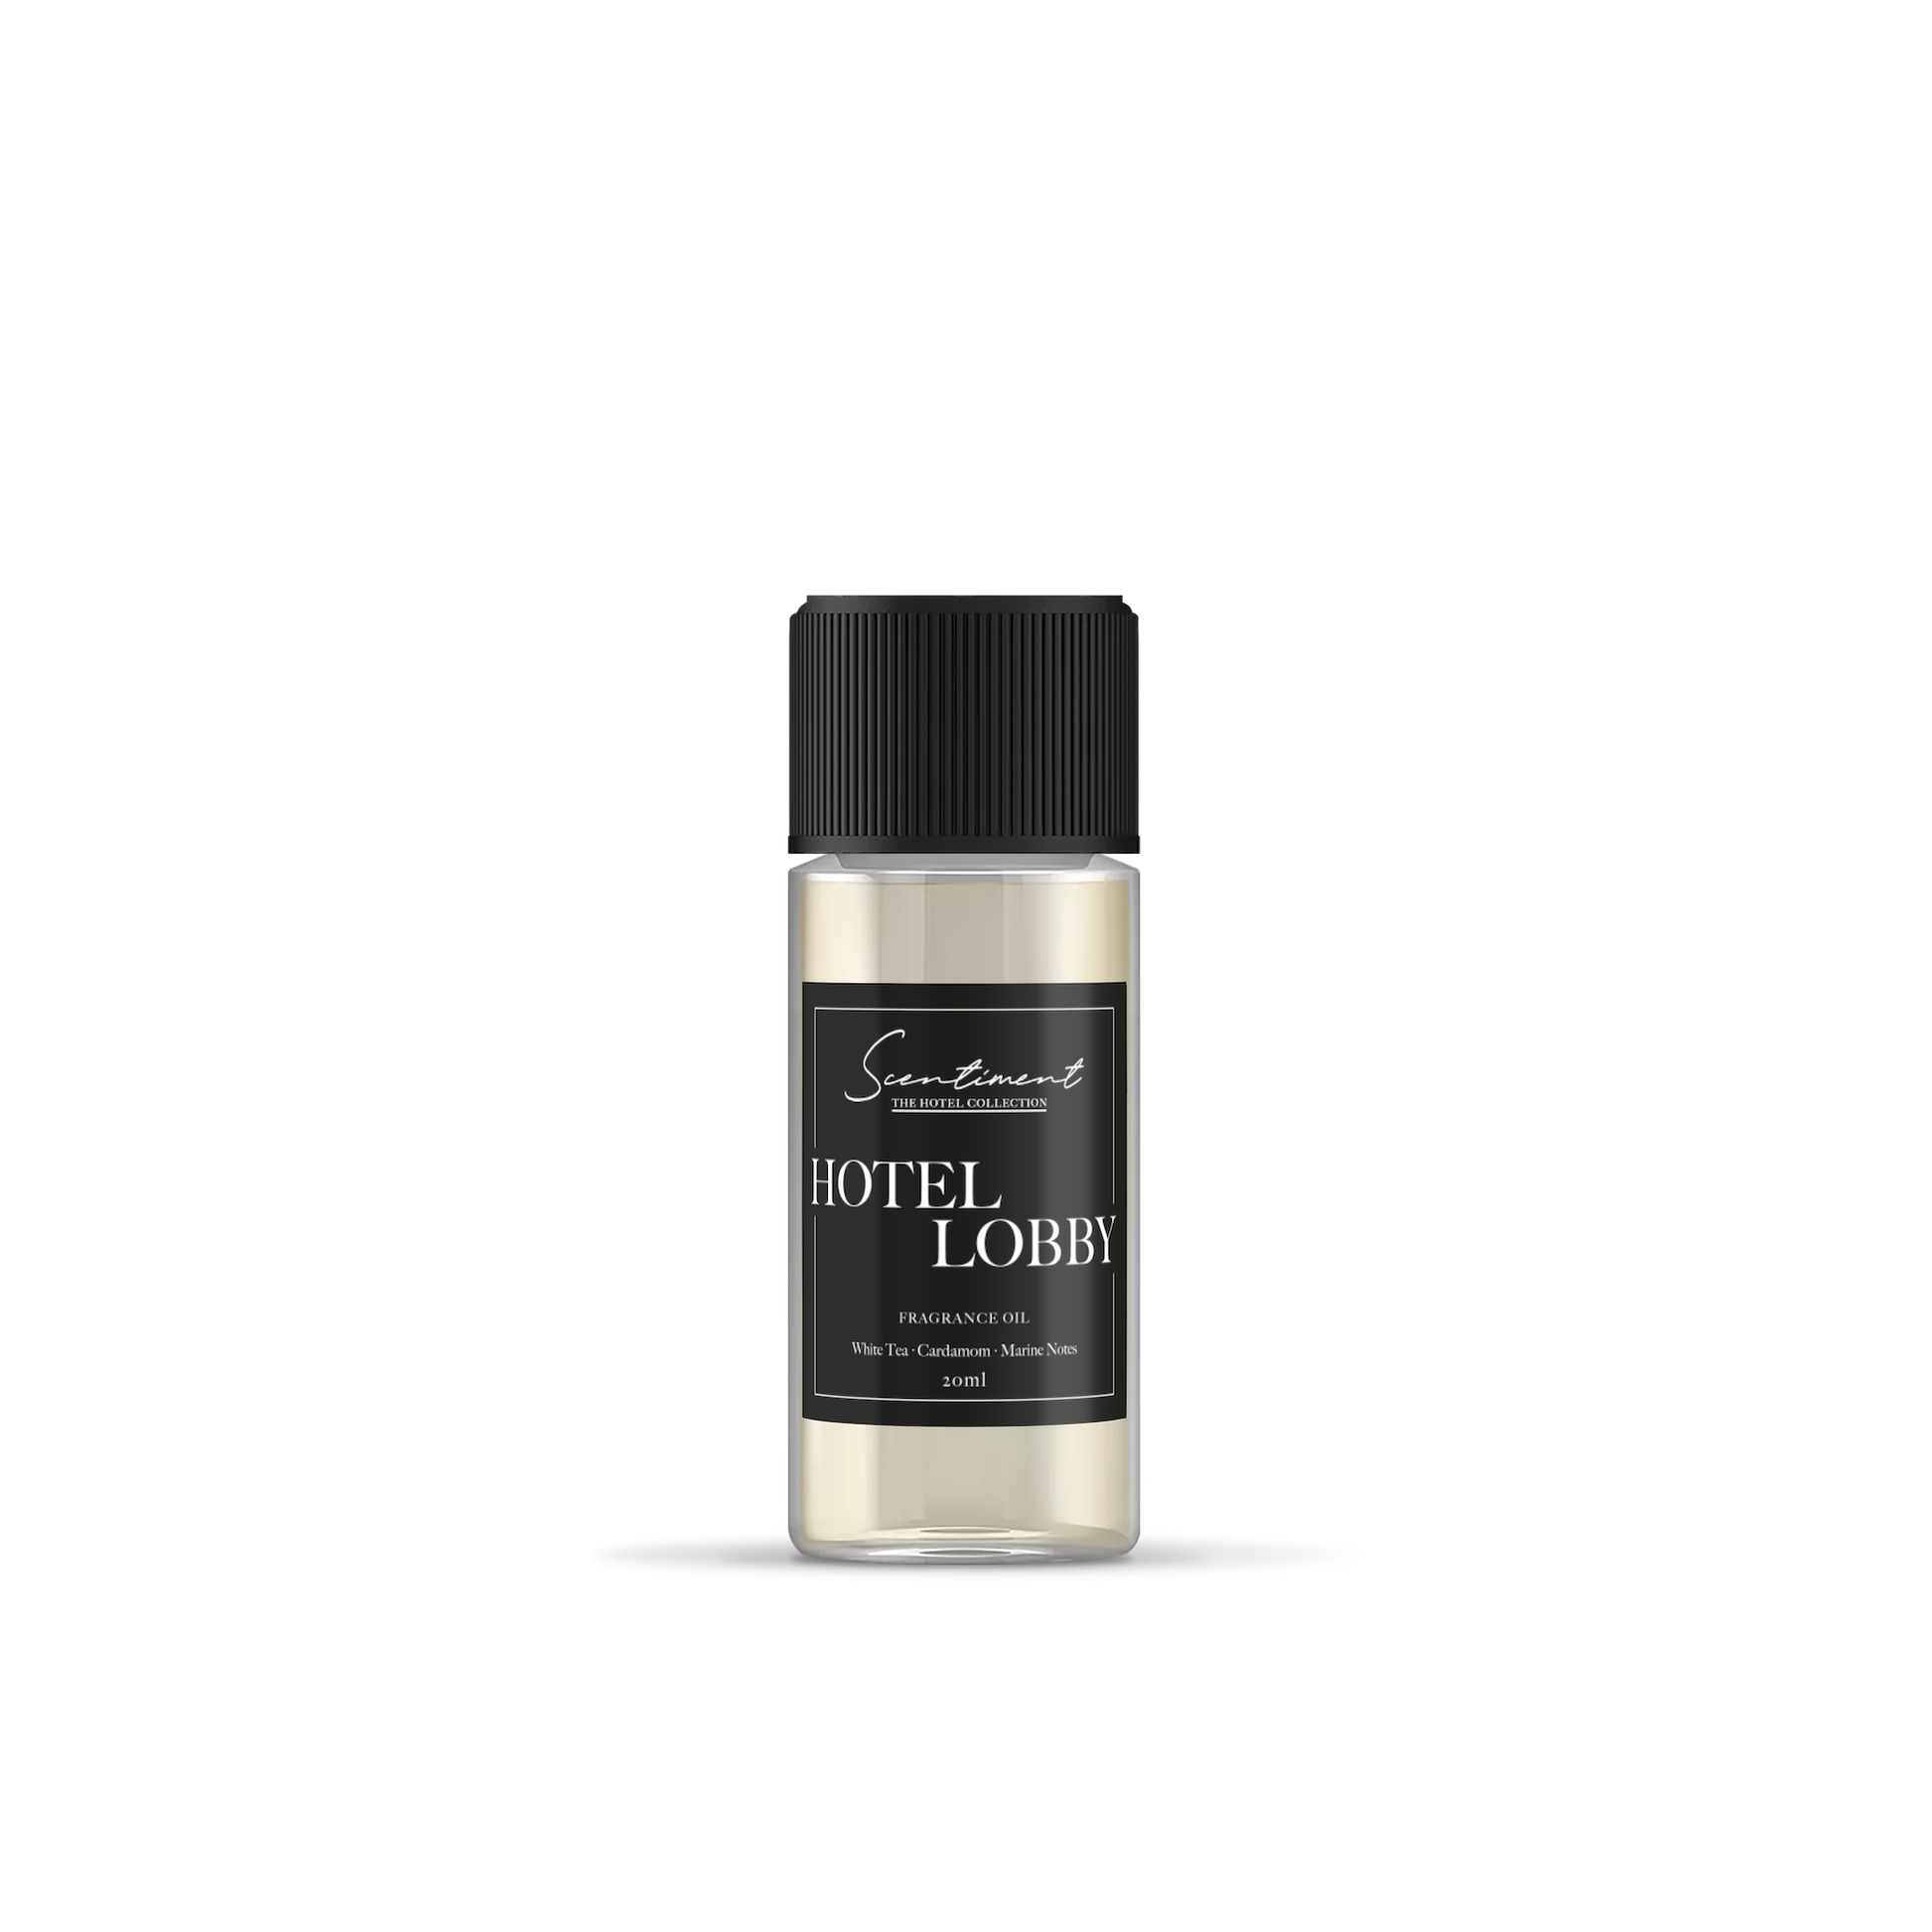 Hotel Lobby Fragrance Oil, inspired by Hilton® with notes of White Tea, Fig, and Roses.